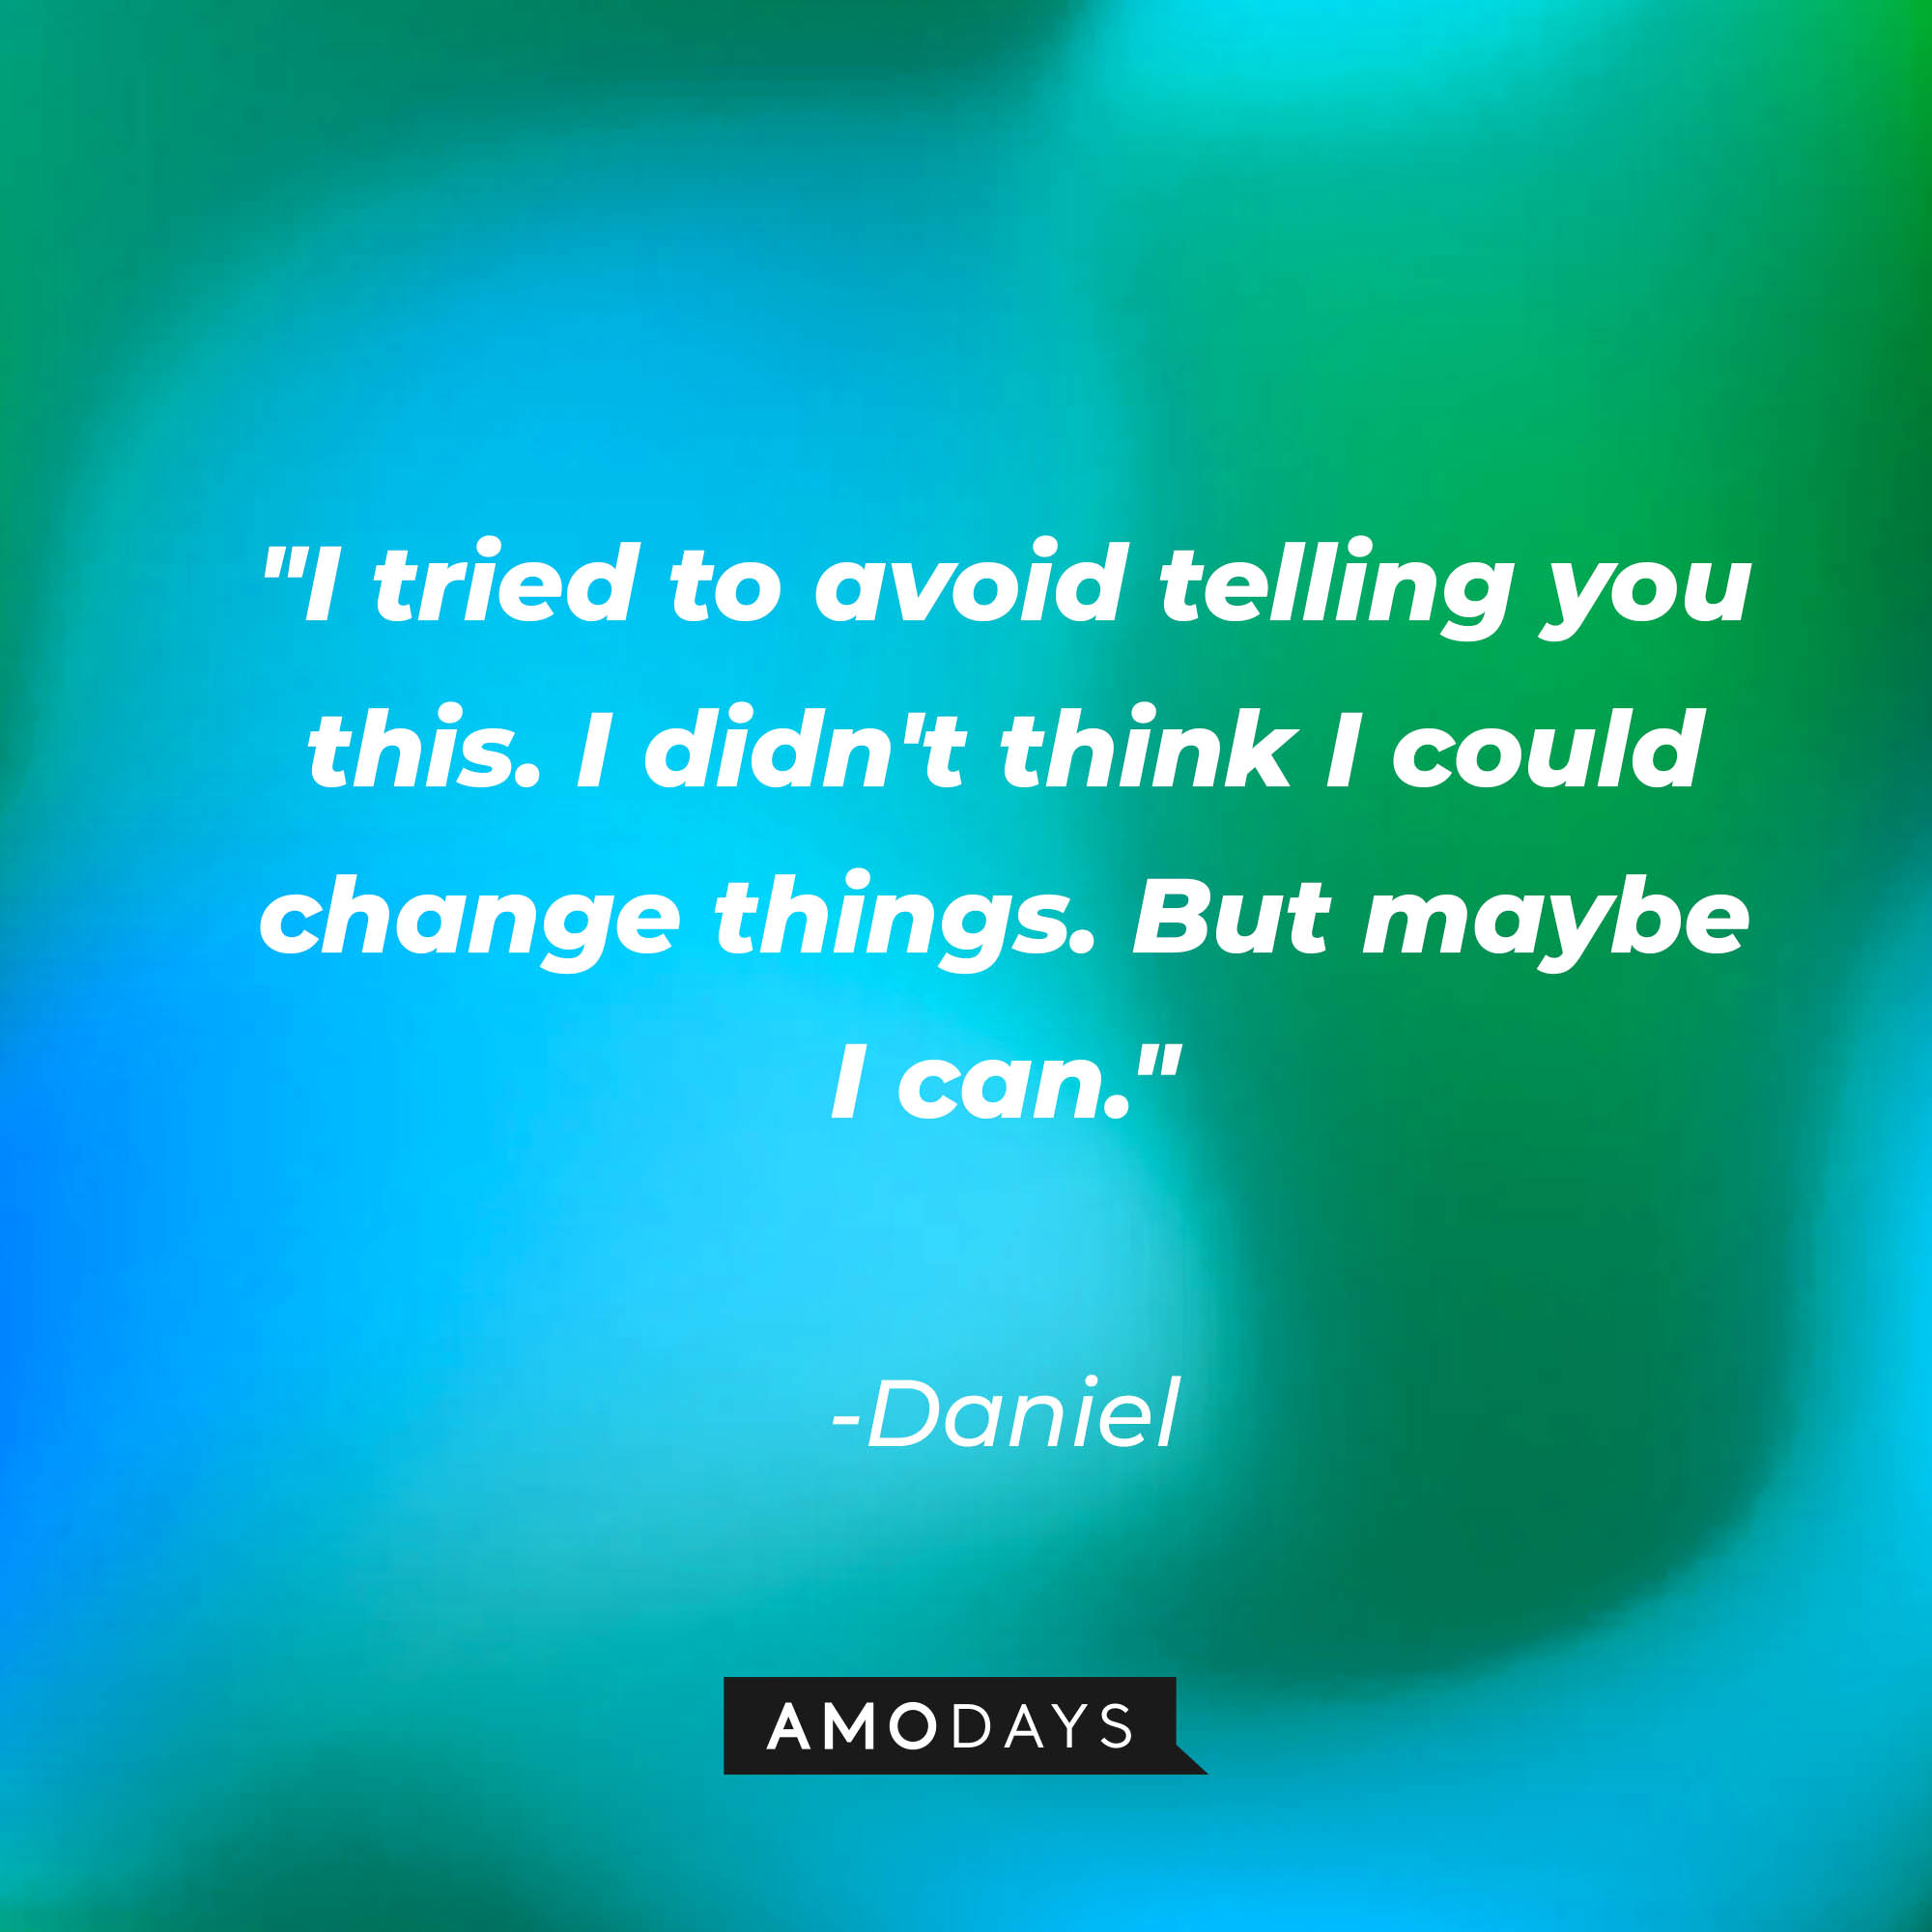 Daniel's quote: "I tried to avoid telling you this. I didn't think I could change things. But maybe I can." | Source: AmoDays